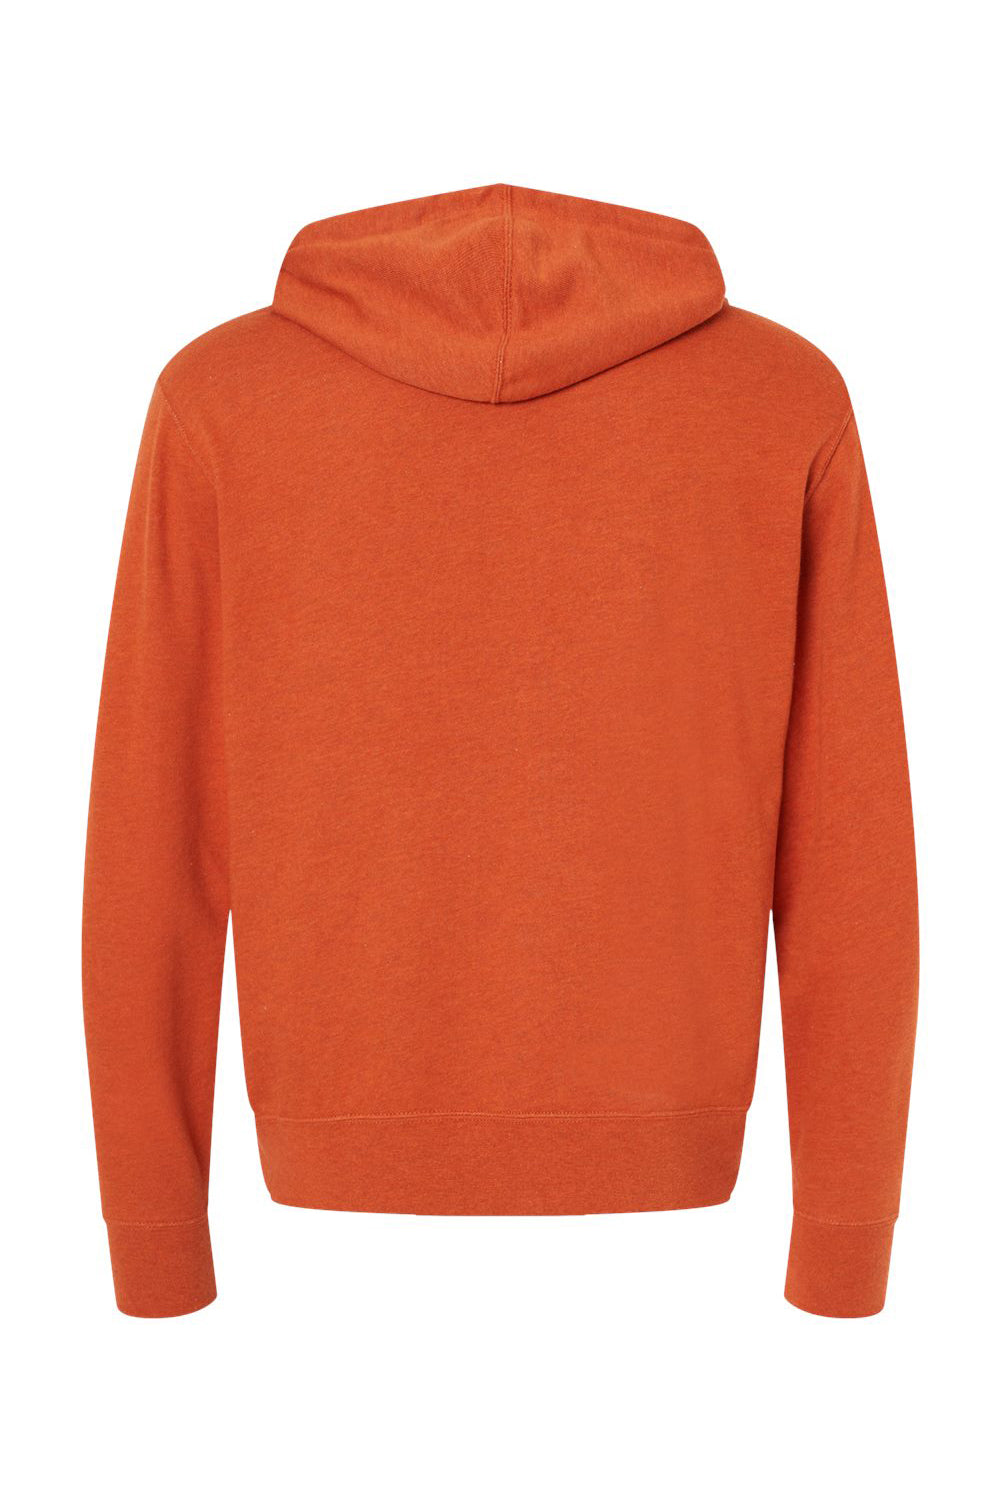 Independent Trading Co. PRM90HT Mens French Terry Hooded Sweatshirt Hoodie Heather Burnt Orange Flat Back